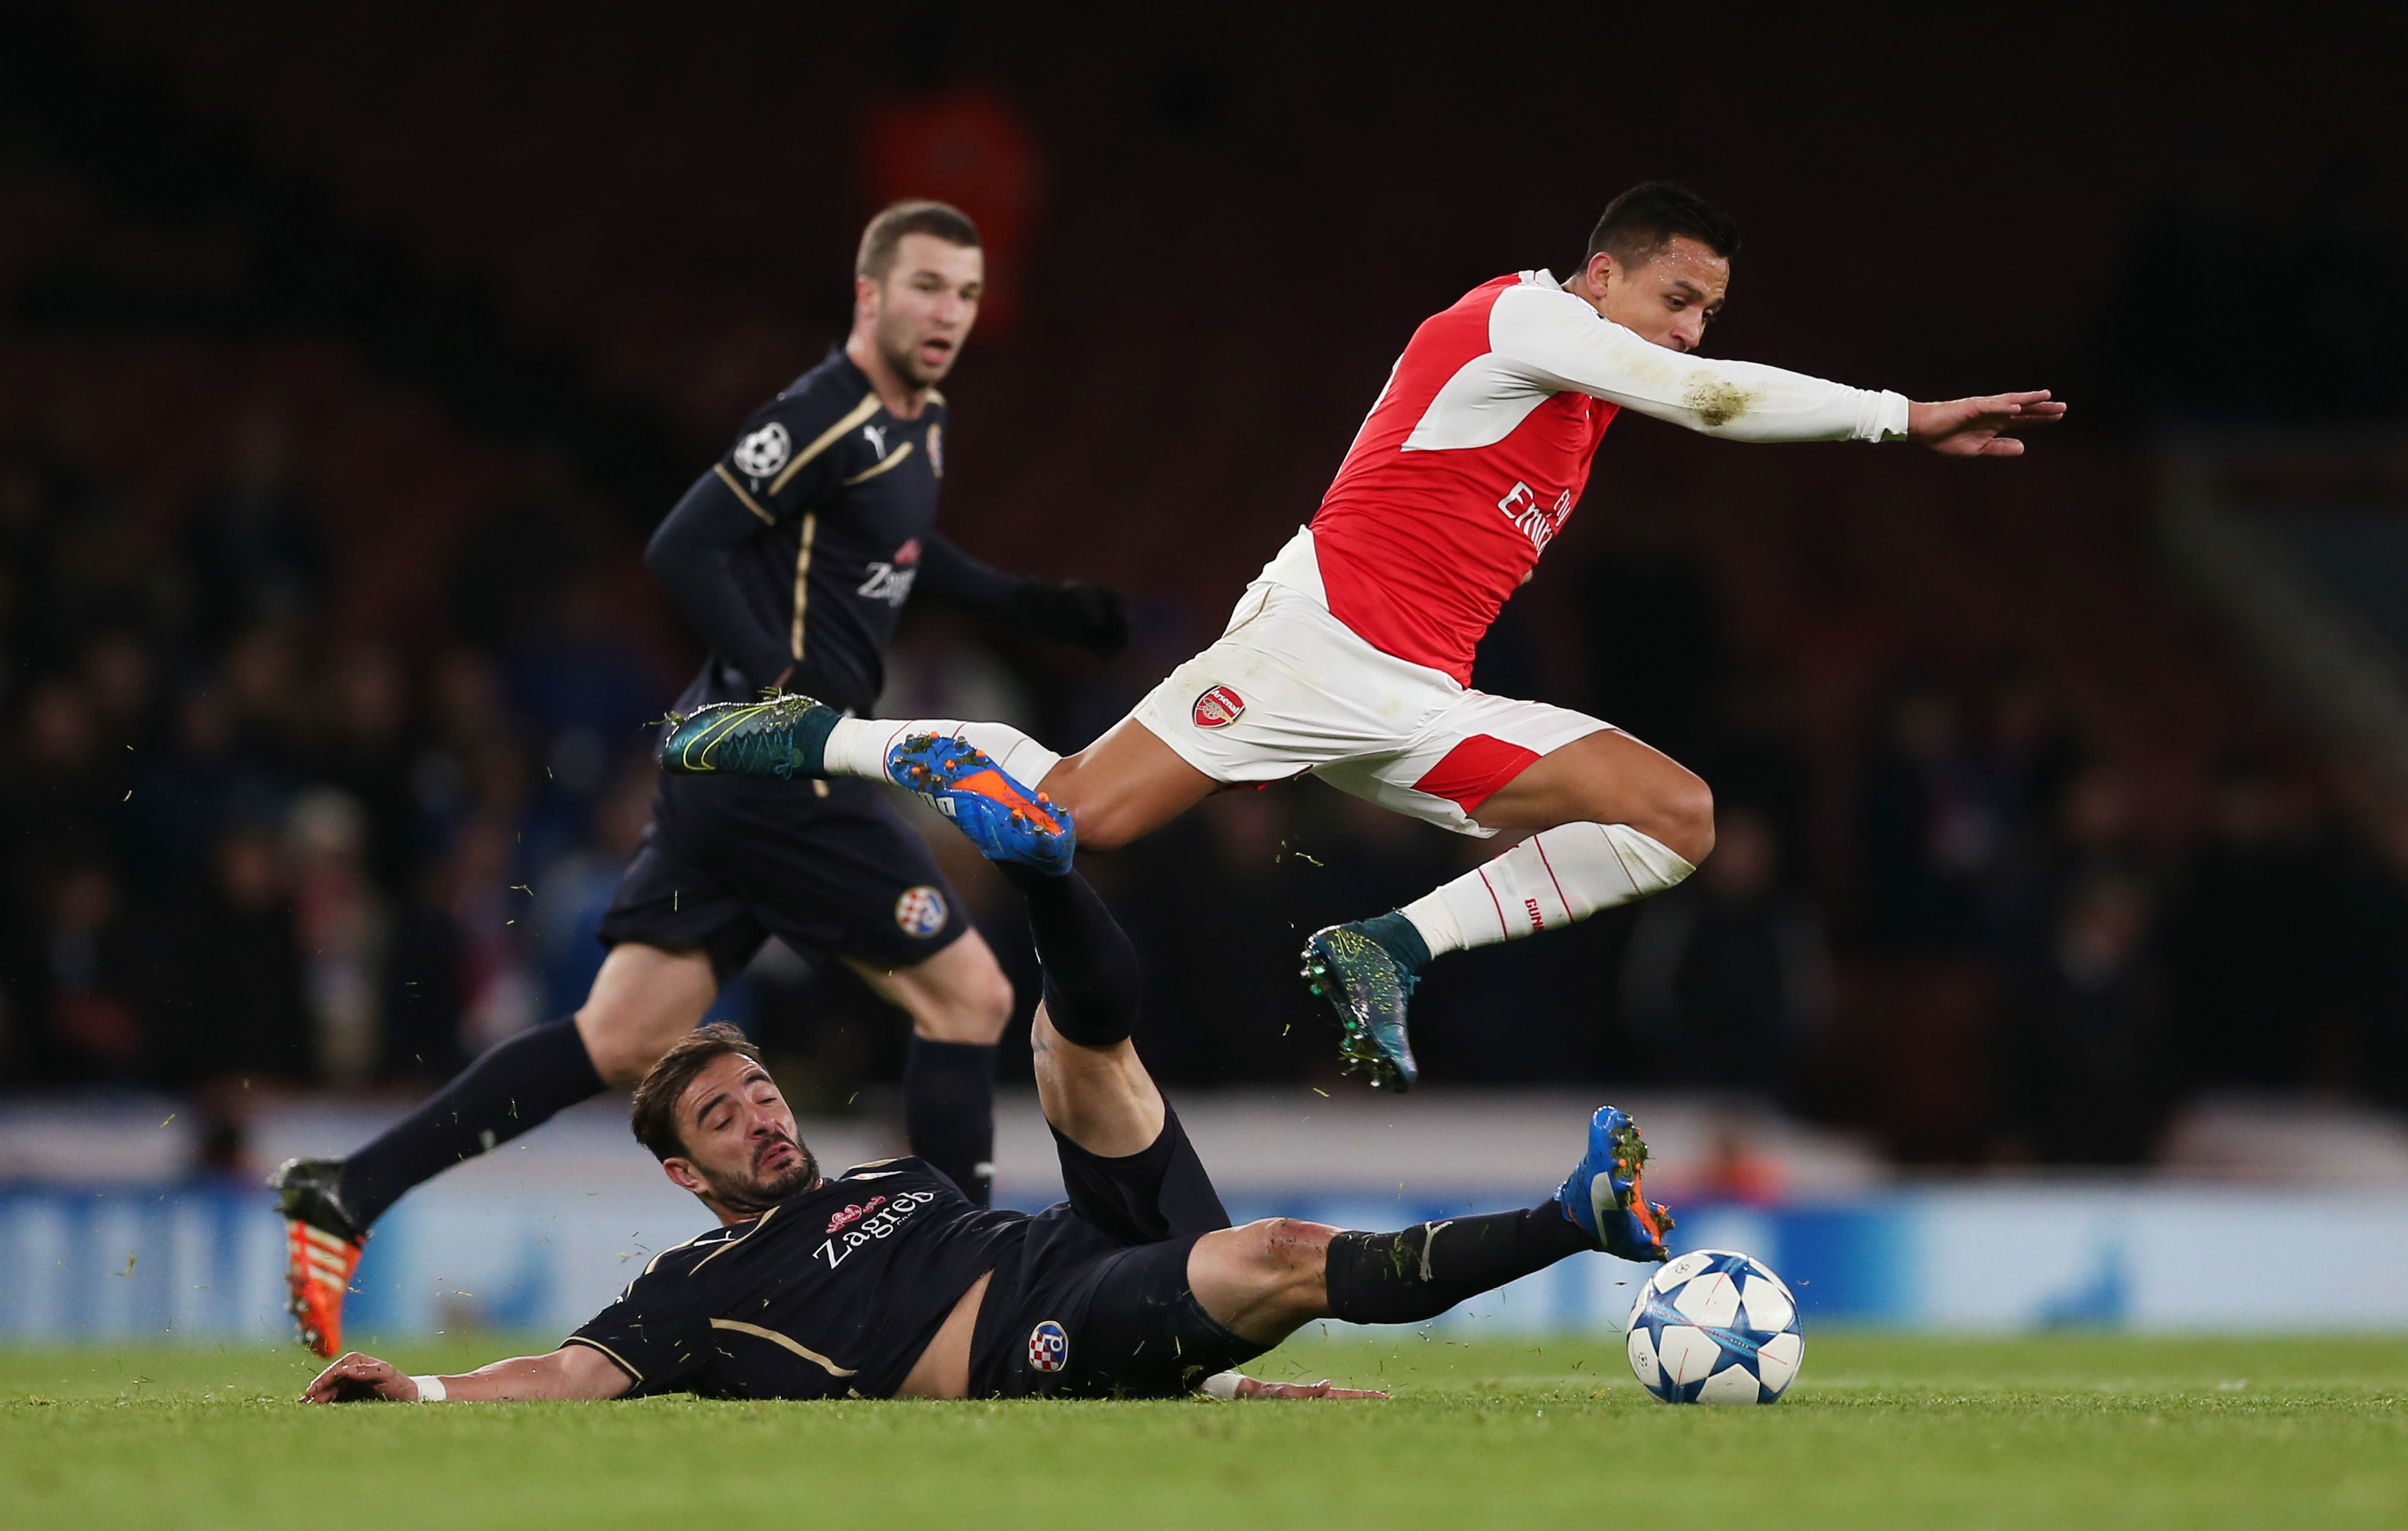 Football Soccer - Arsenal v Dinamo Zagreb - UEFA Champions League Group Stage - Group F - Emirates Stadium, London, England - 24/11/15nArsenal's Alexis Sanchez in action with Dinamo Zagreb's Goncalo SantosnAction Images via Reuters / Matthew ChildsnLivepicnEDITORIAL USE ONLY.